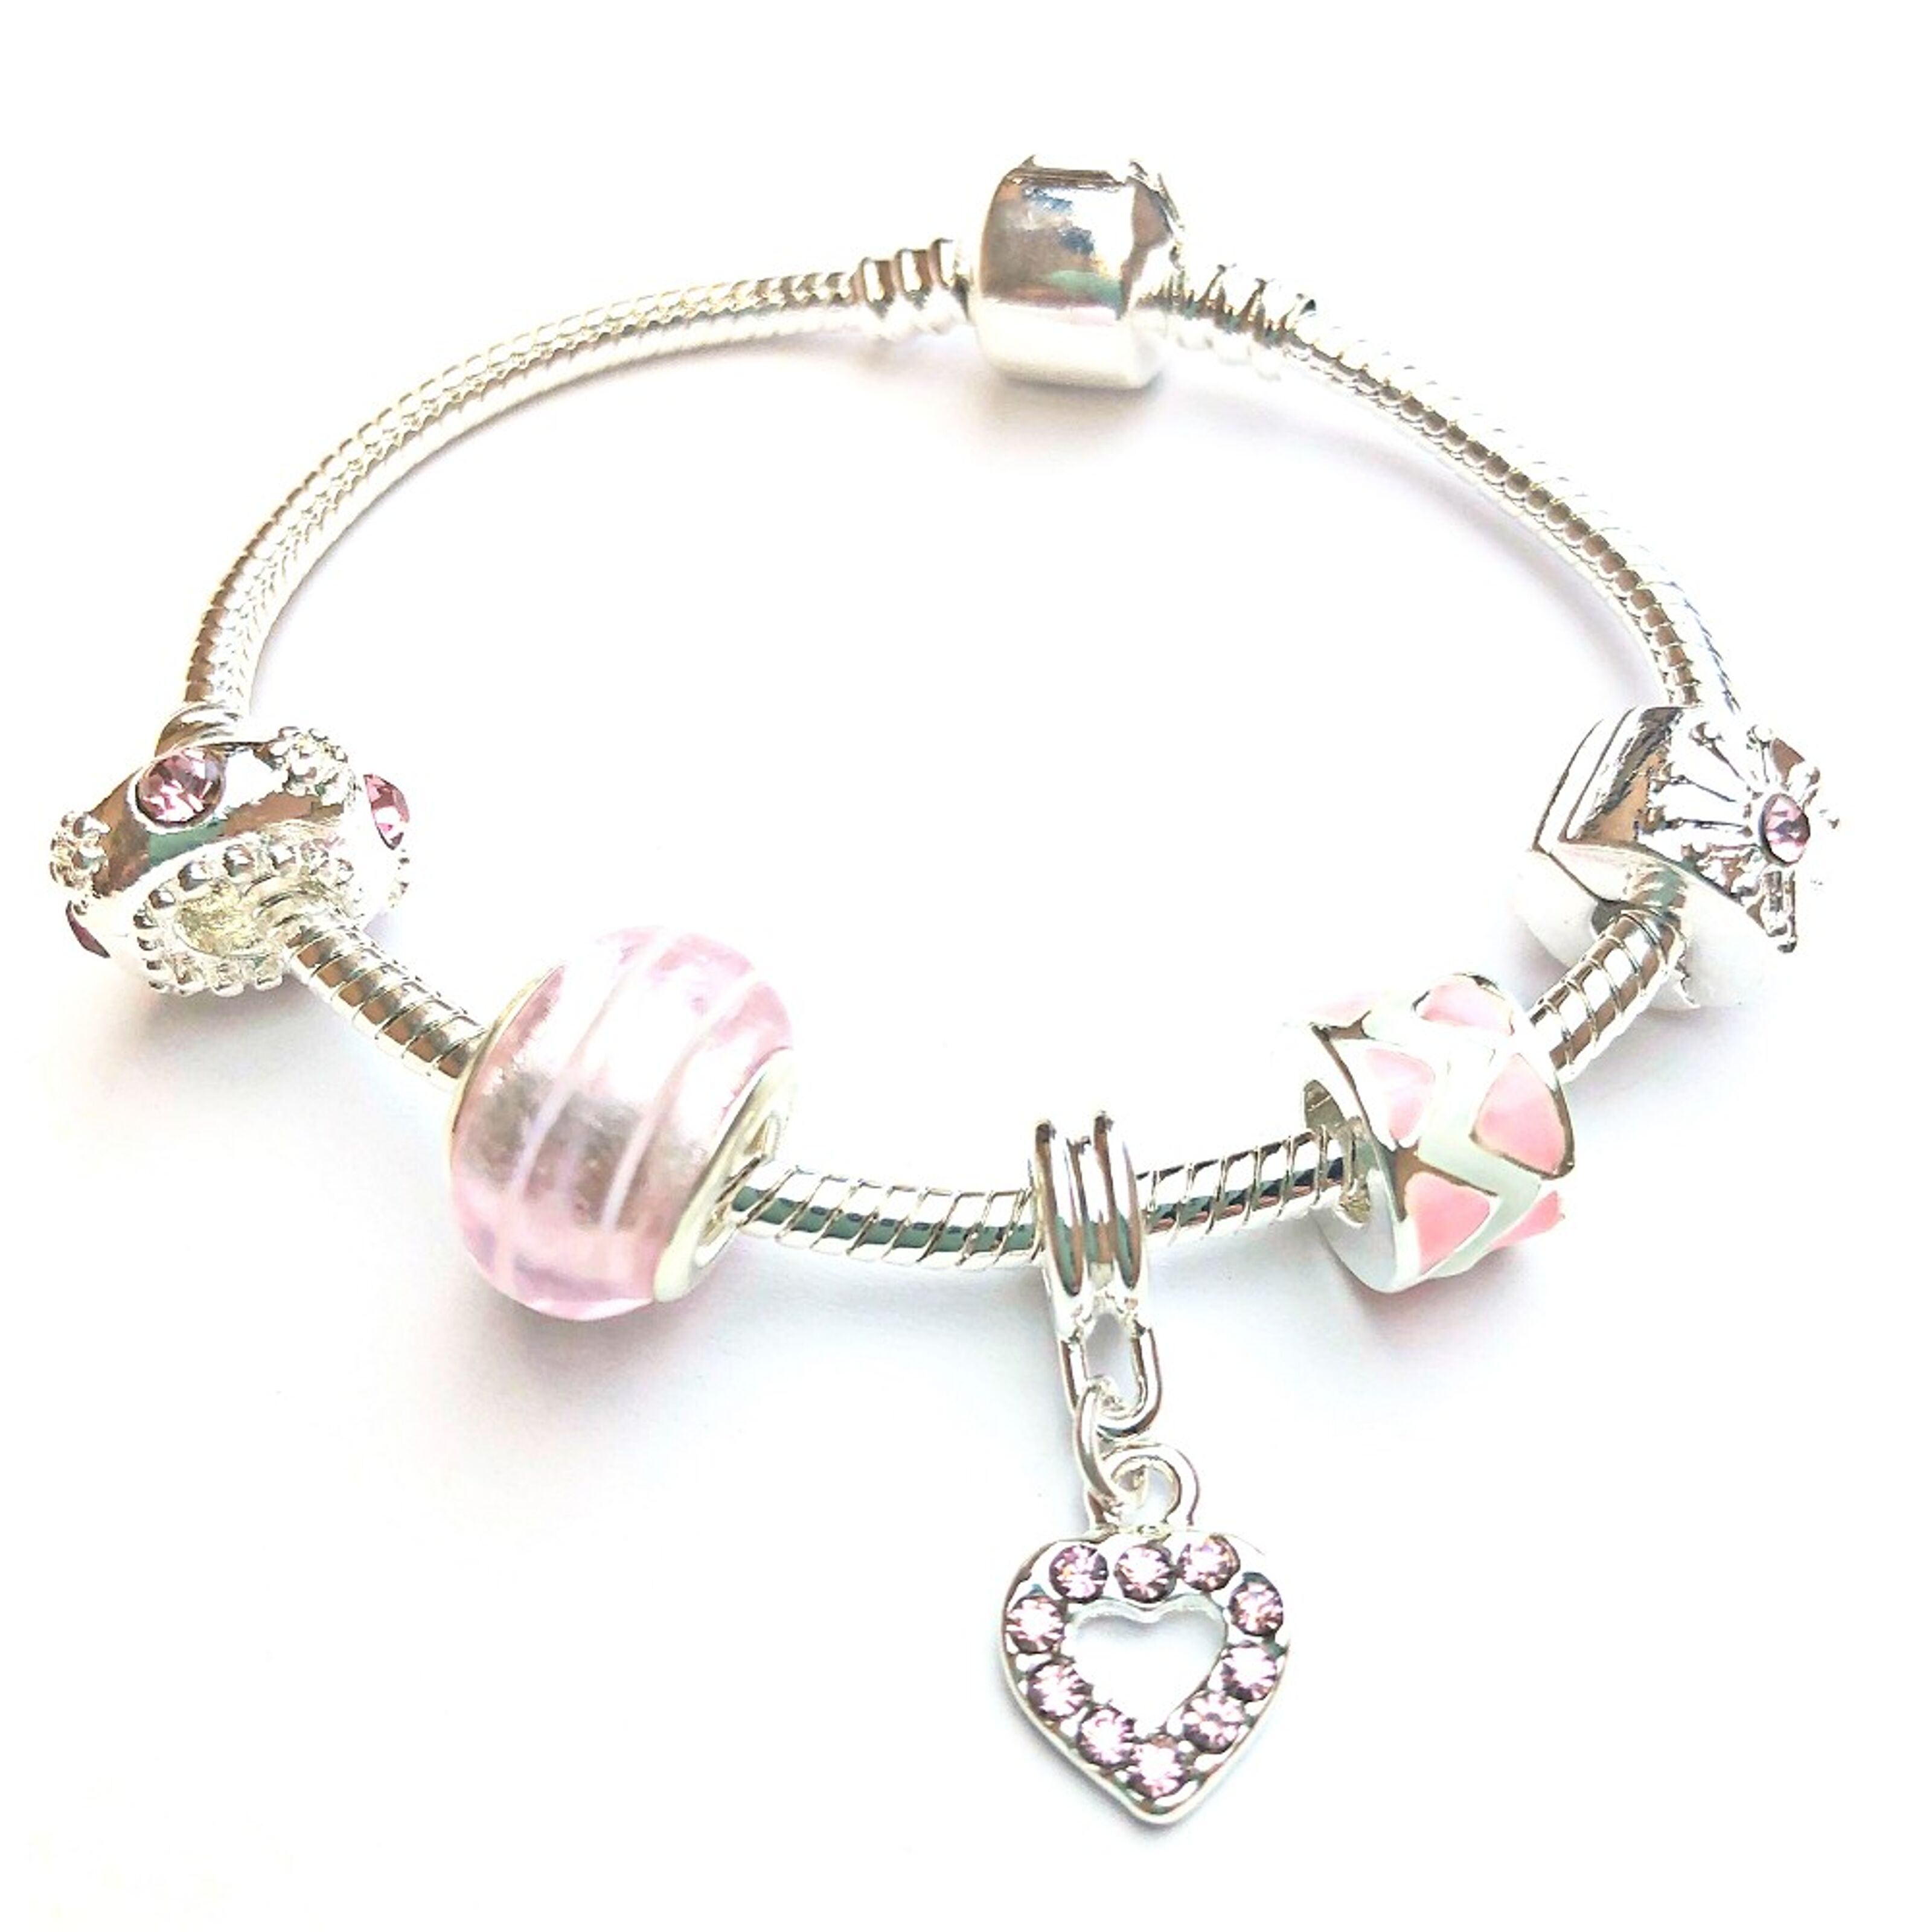 Cute Grandmother Pink Charm Bracelet Silver Tone Hat Heart Charms